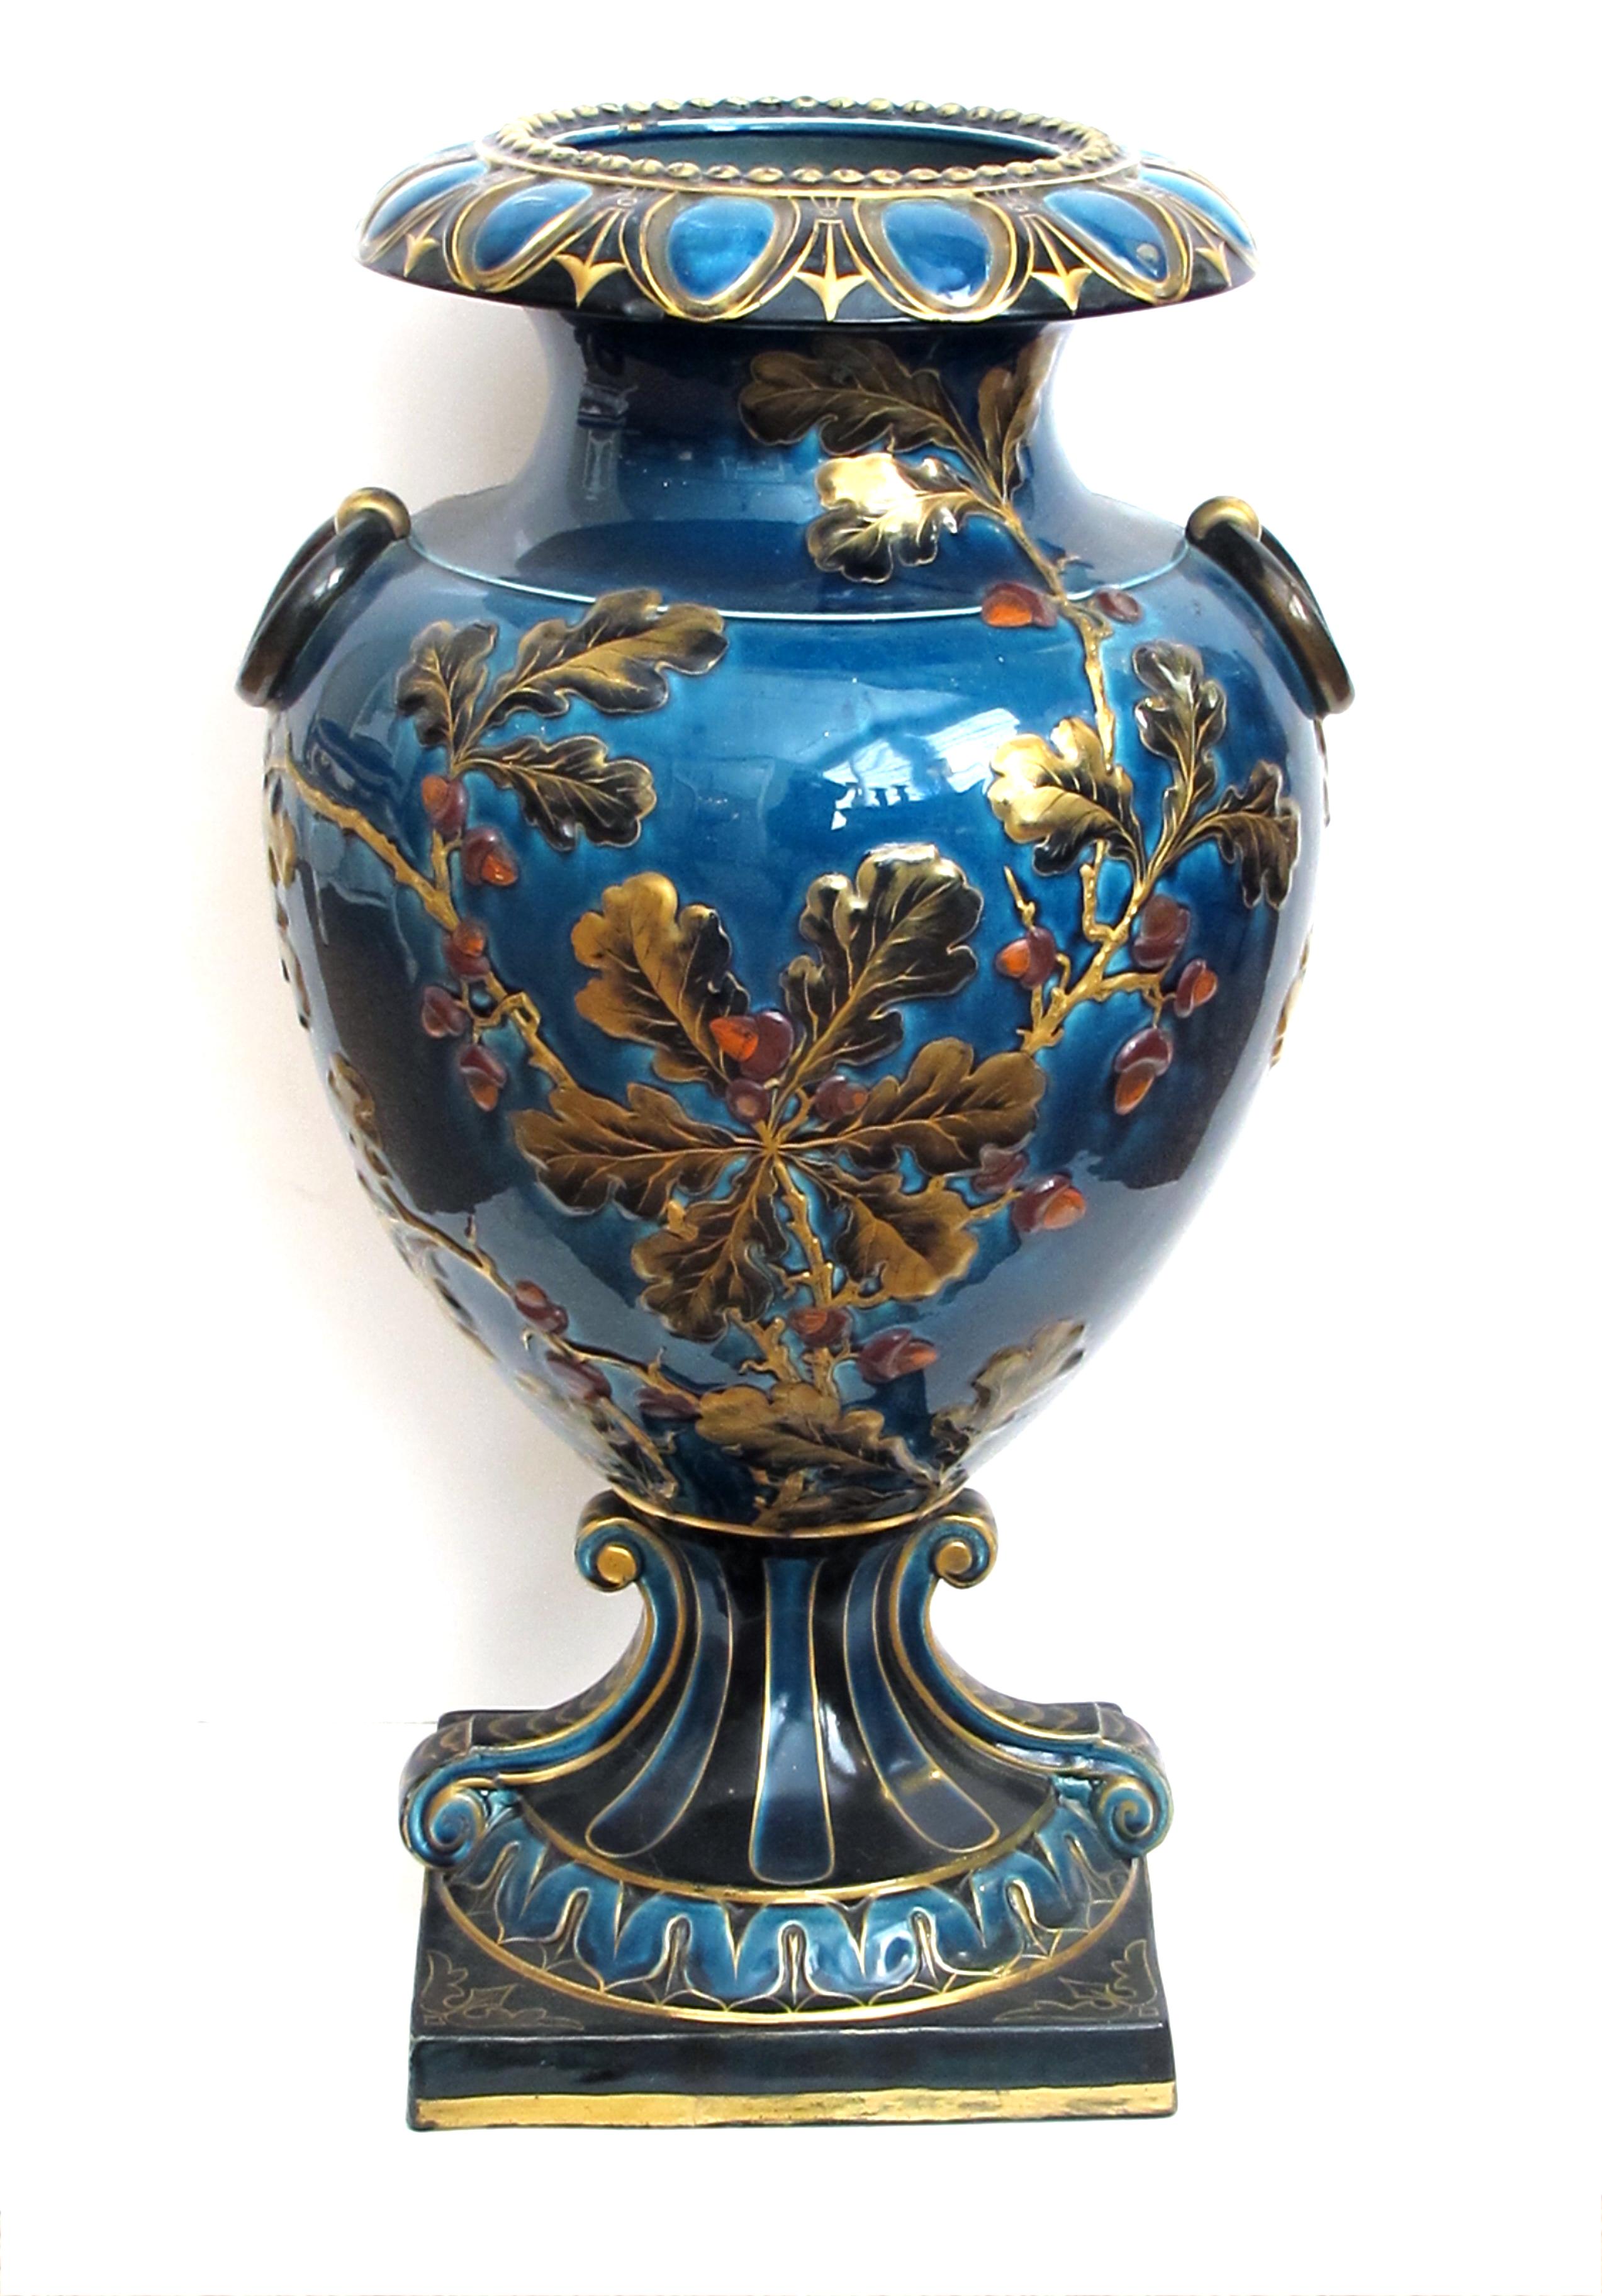 A large and exquisitely rendered English teal-glazed ceramic urn with raised oak branch-work decoration; a true state piece with rolled lip adorned with egg-and-dart motif; above an ovoid body flanked by applied ring handles and decorated with